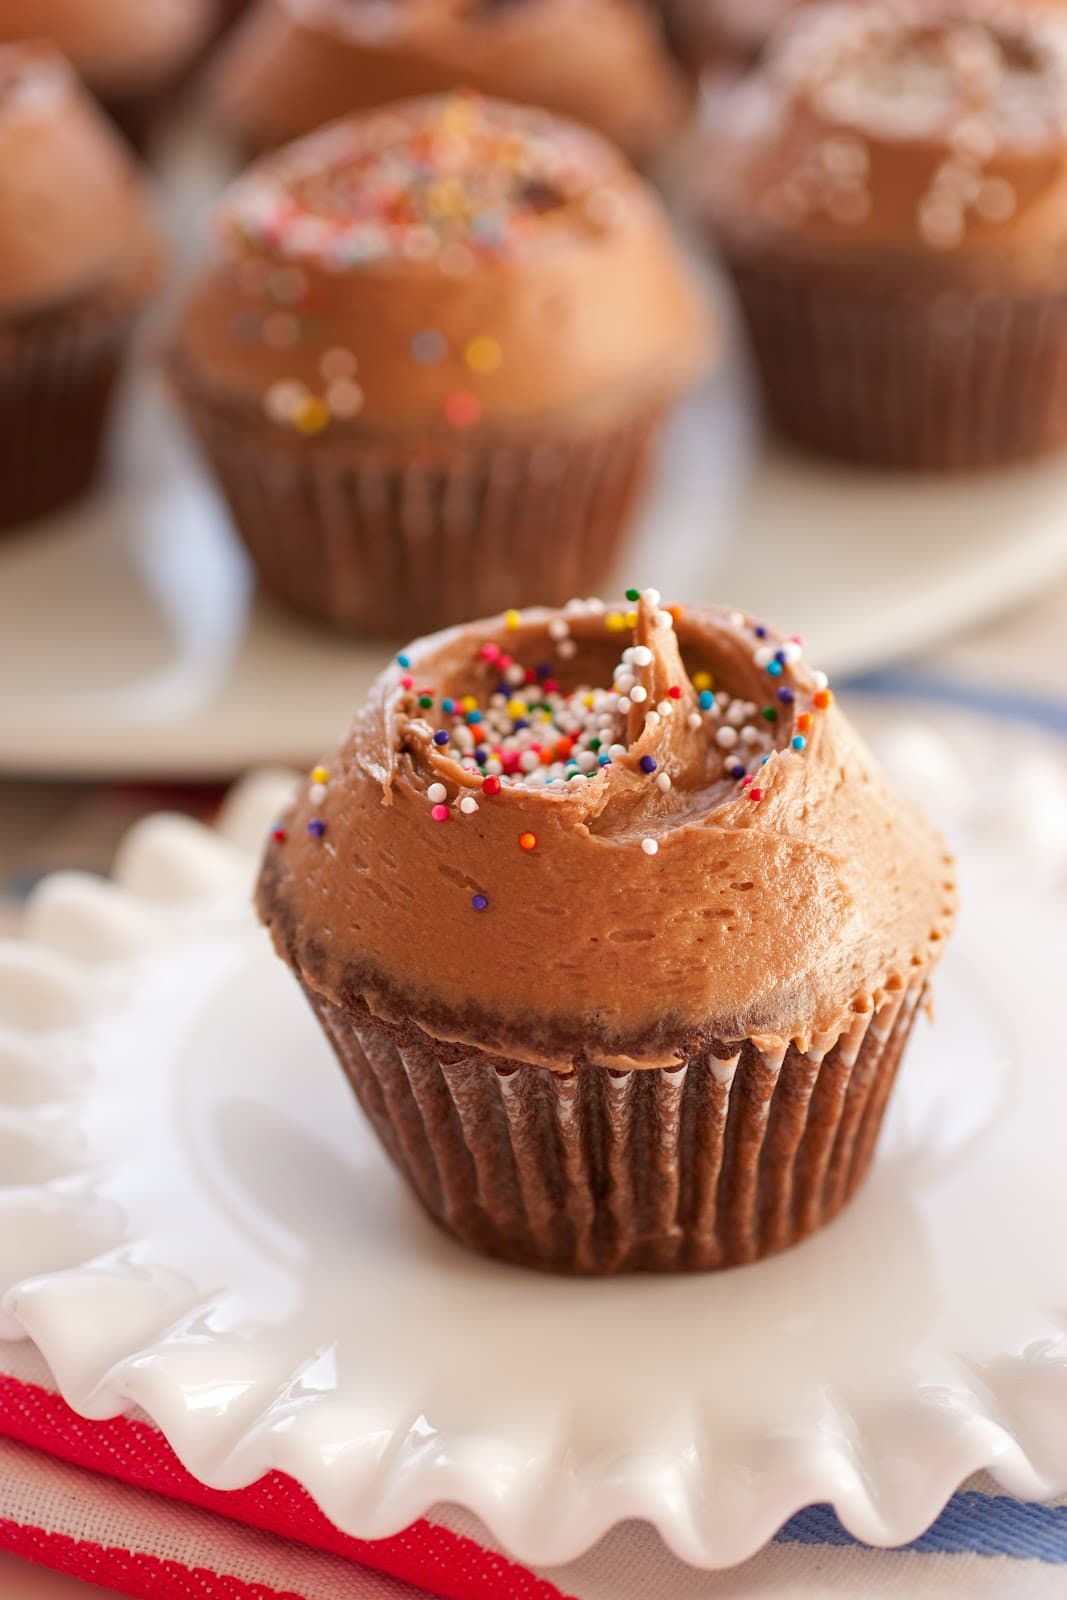 Chocolate Cupcakes with Chocolate Cream Cheese Frosting - Cooking Classy